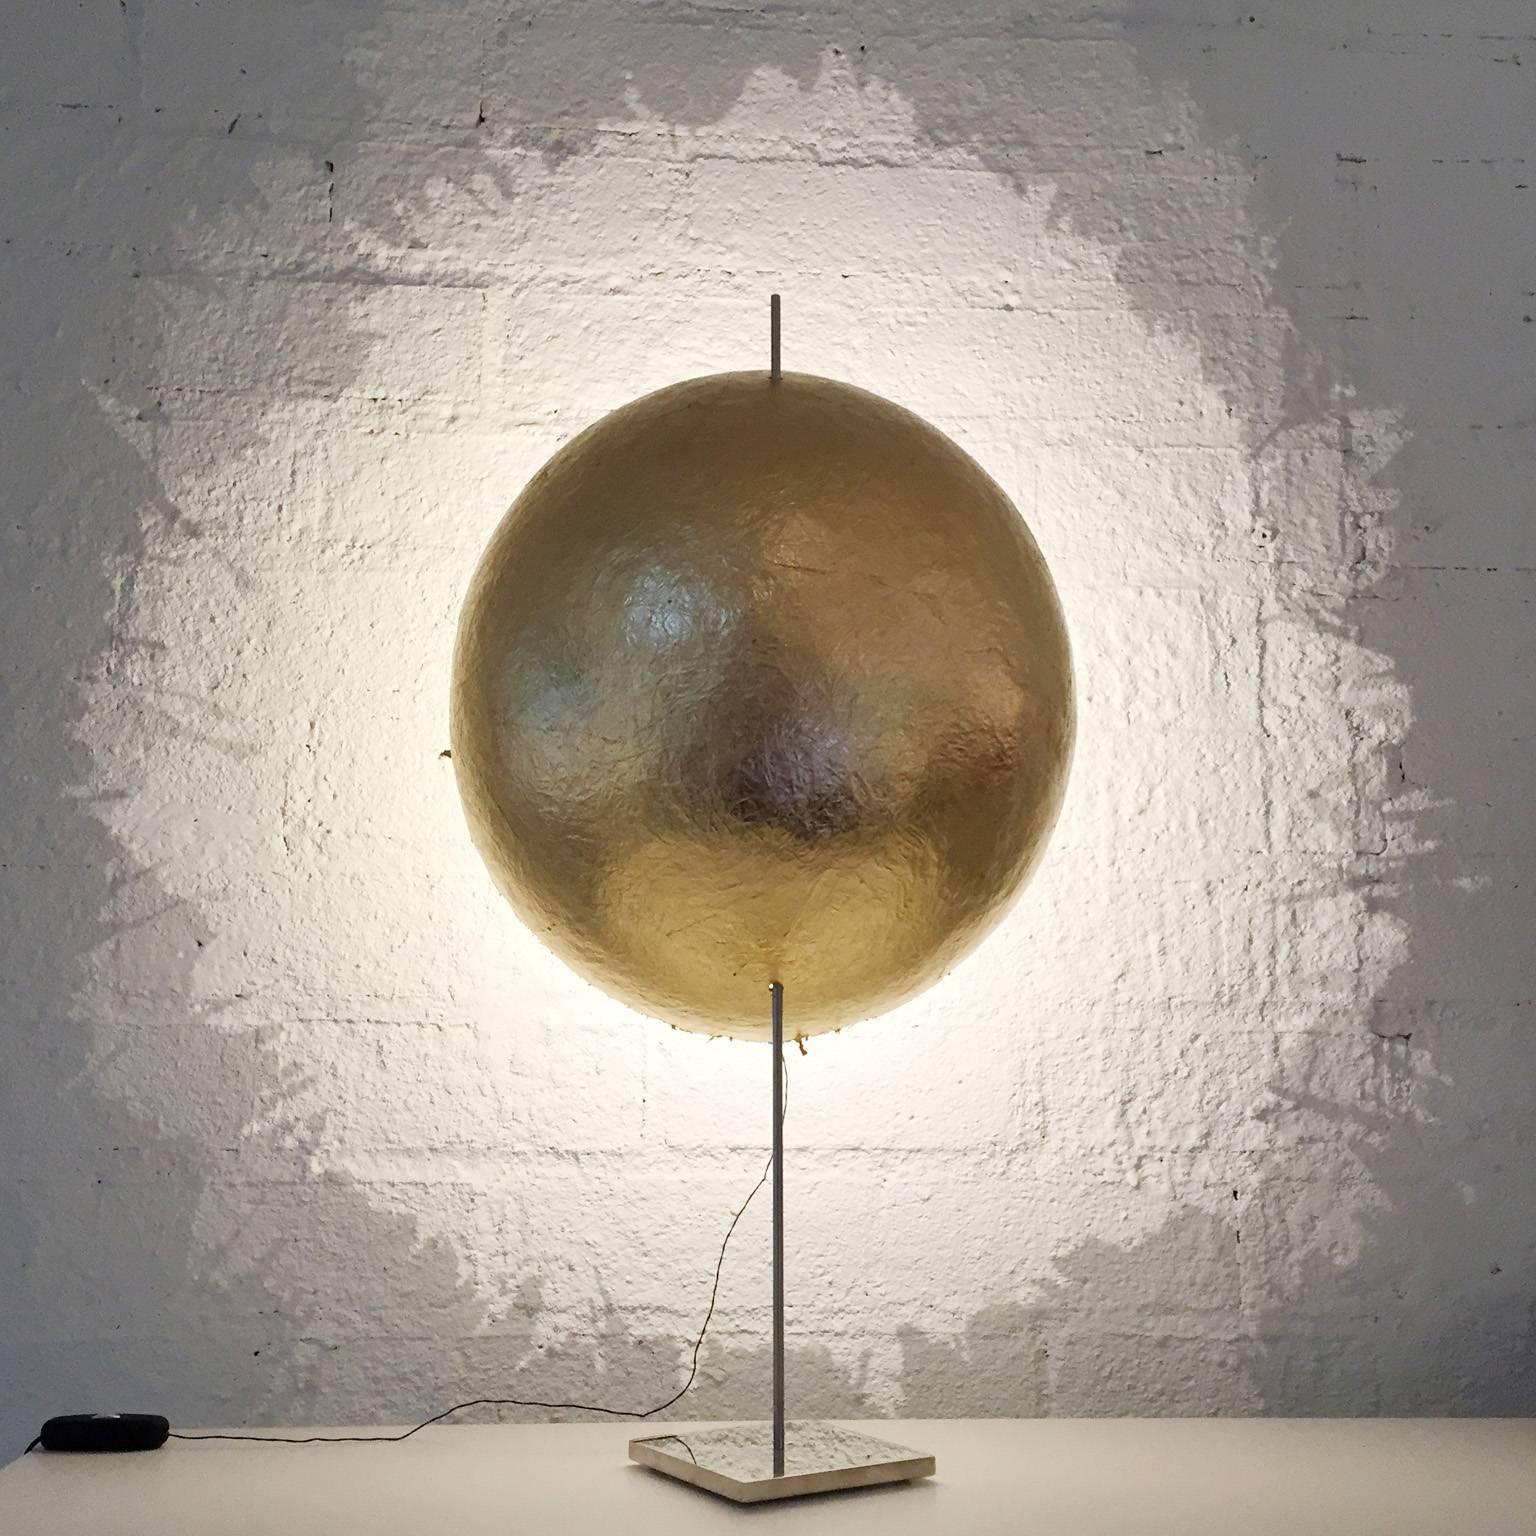 LED table lamp with nickel-plated copper structure and hand formed natural fiberglass shaded finished in gold leaf with uneven edges casting unique shadow lines, available from showroom display. 
Dimensions: 15.75